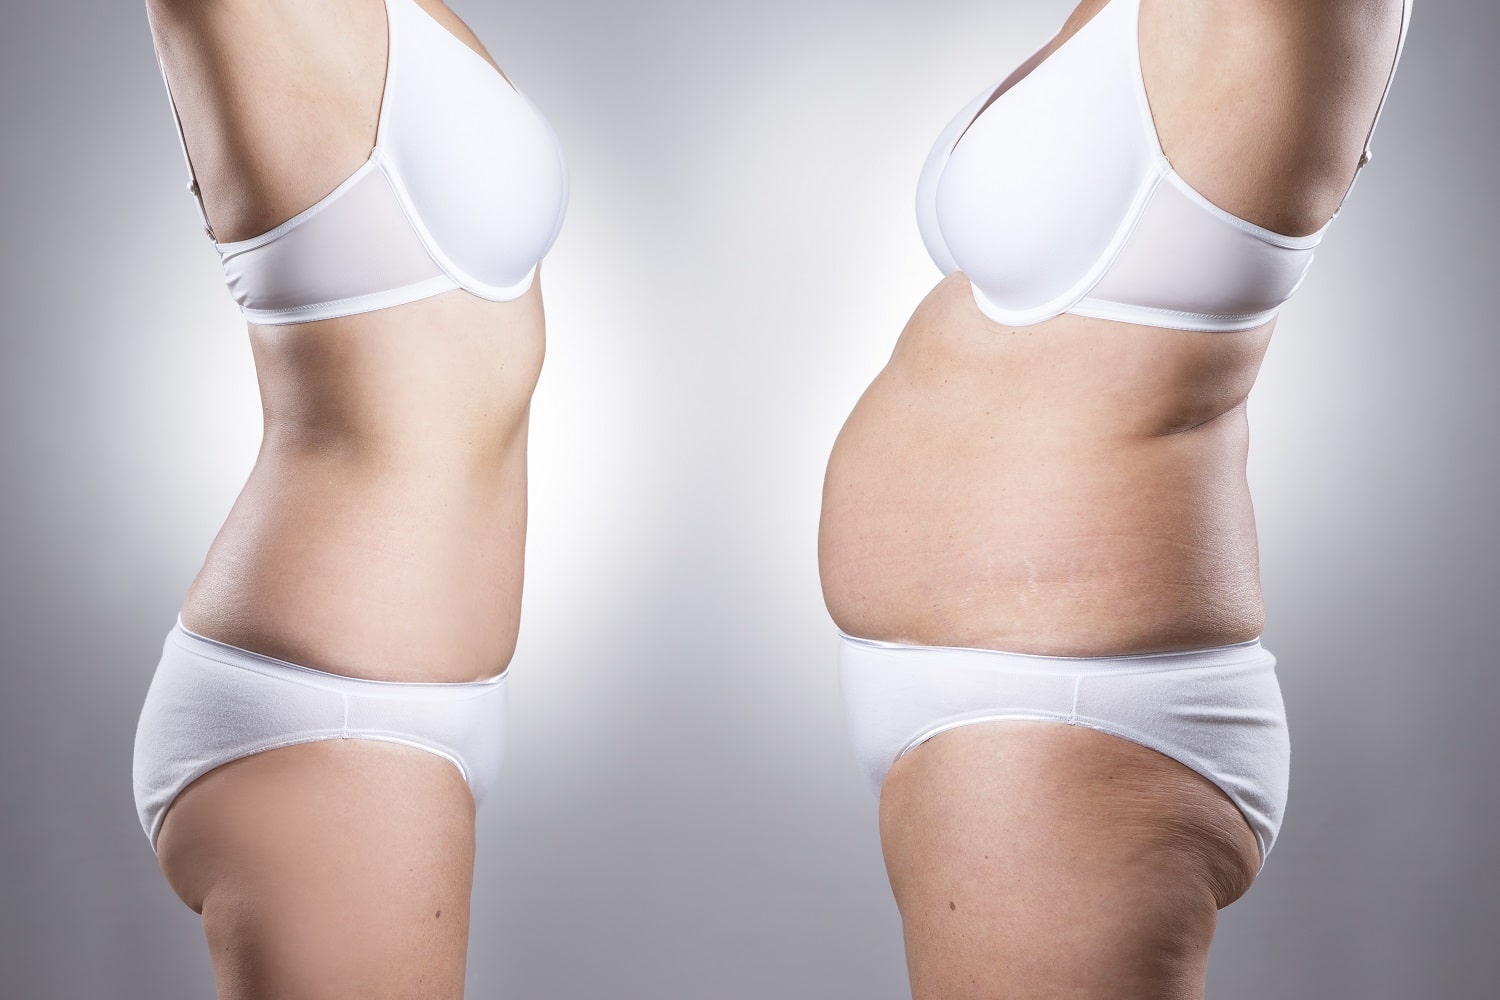 How Can Insurance Cover Tummy Tuck